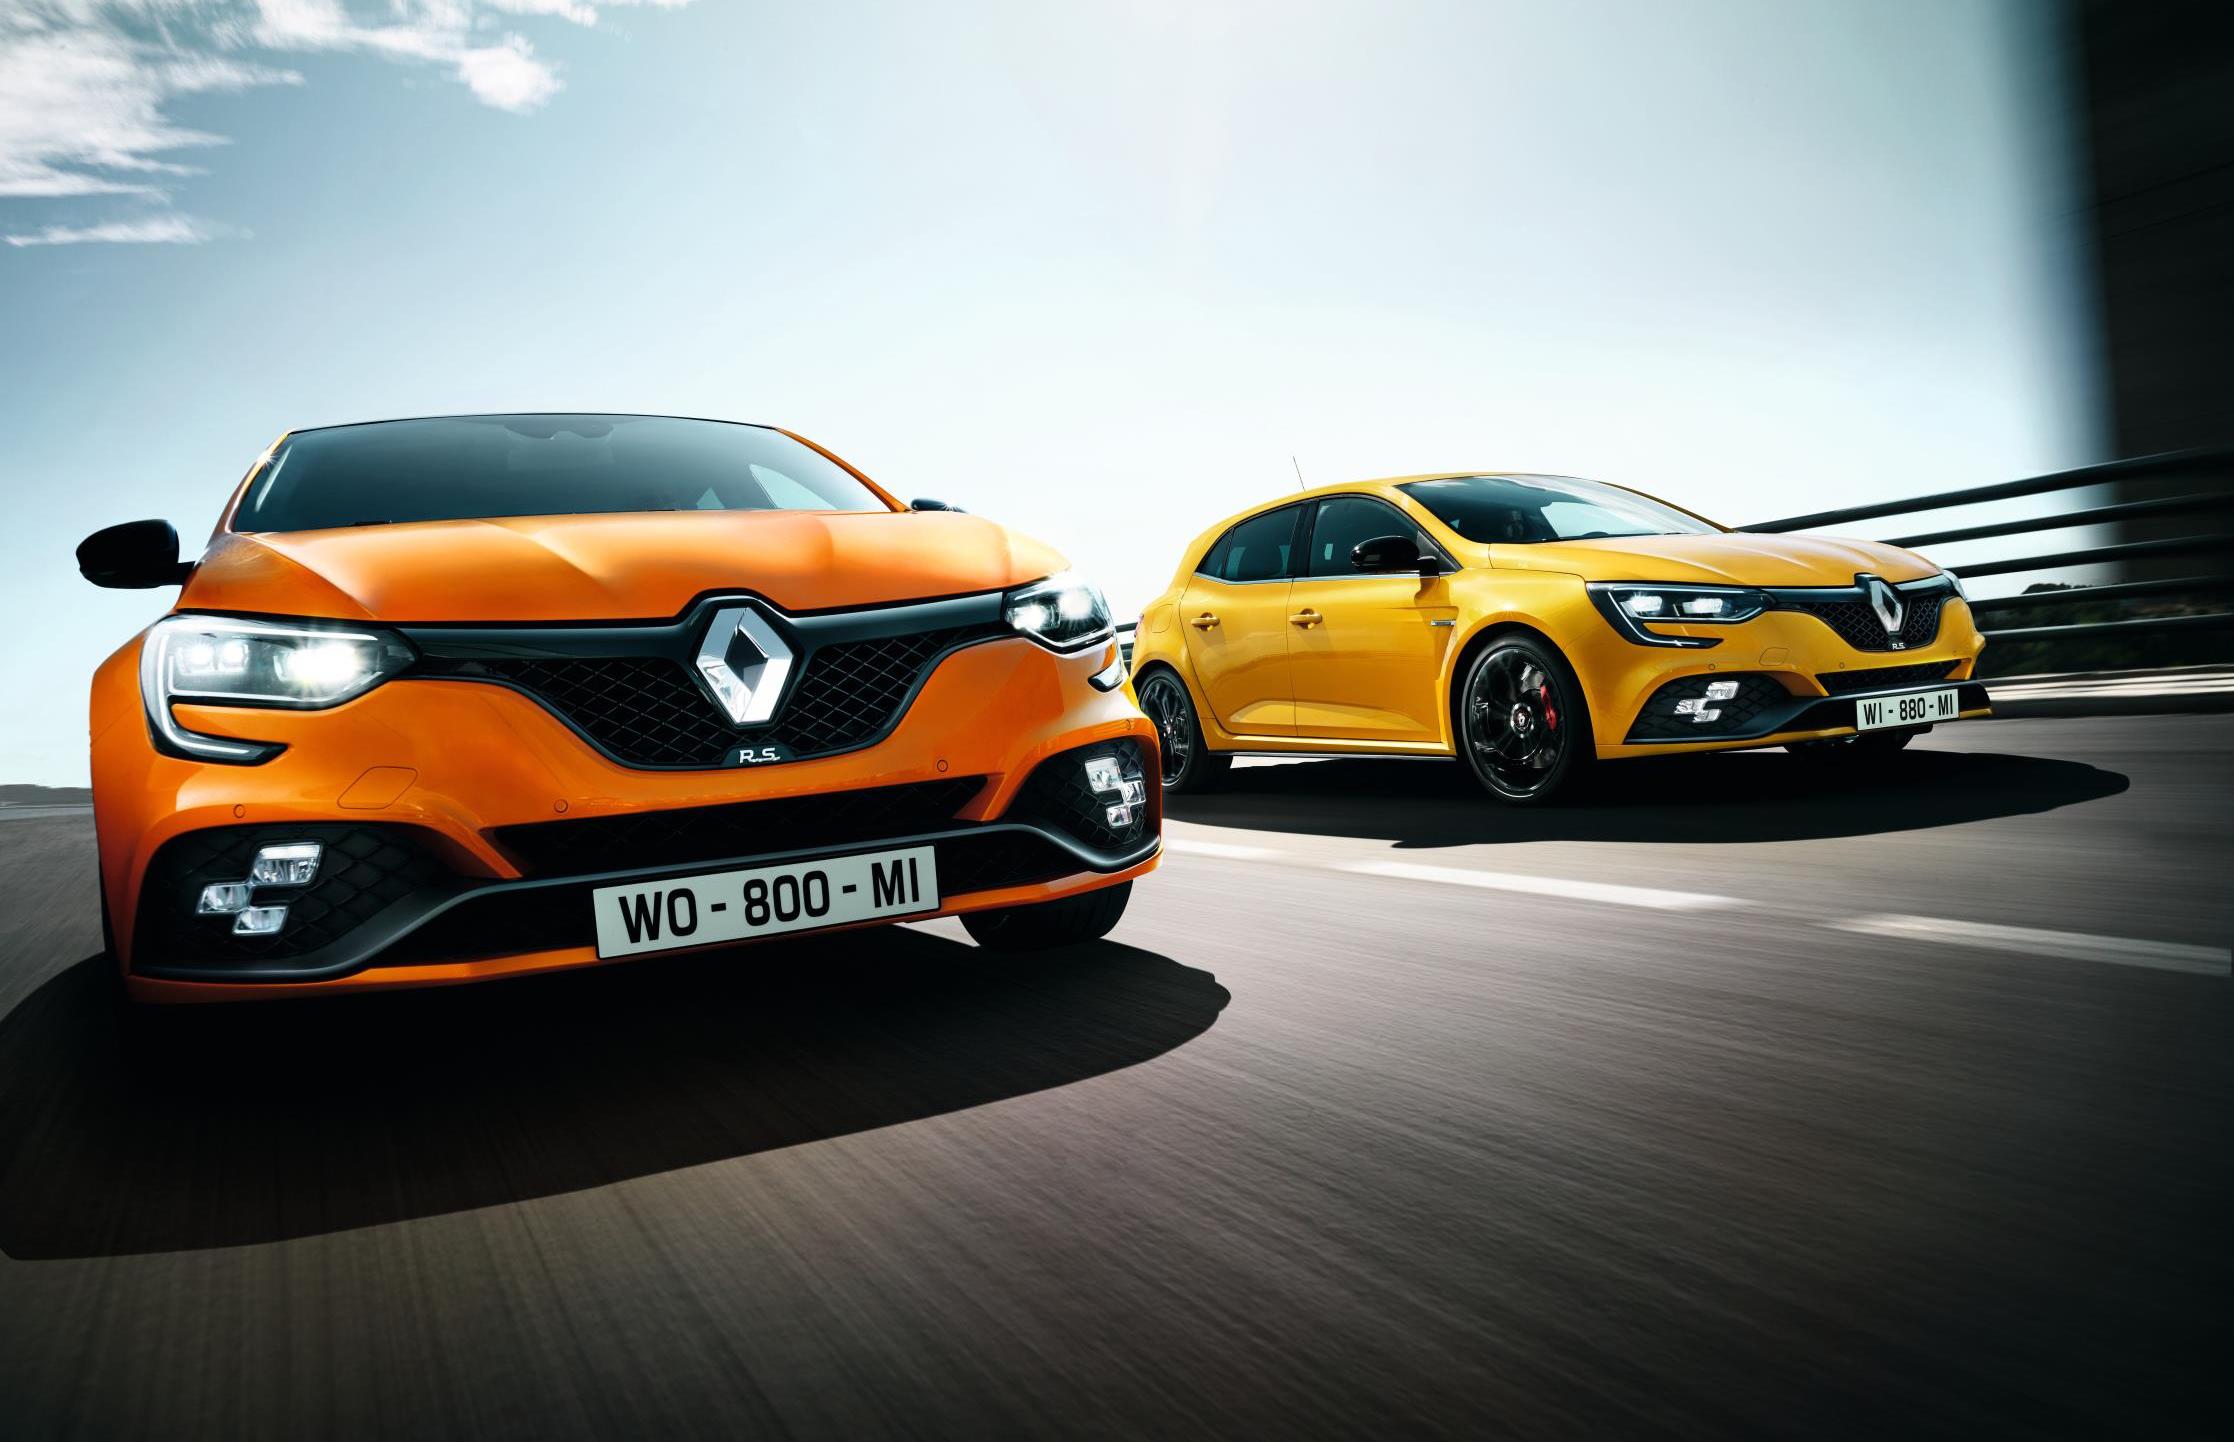 2018 Renault Megane R.S. revealed with potent 1.8T